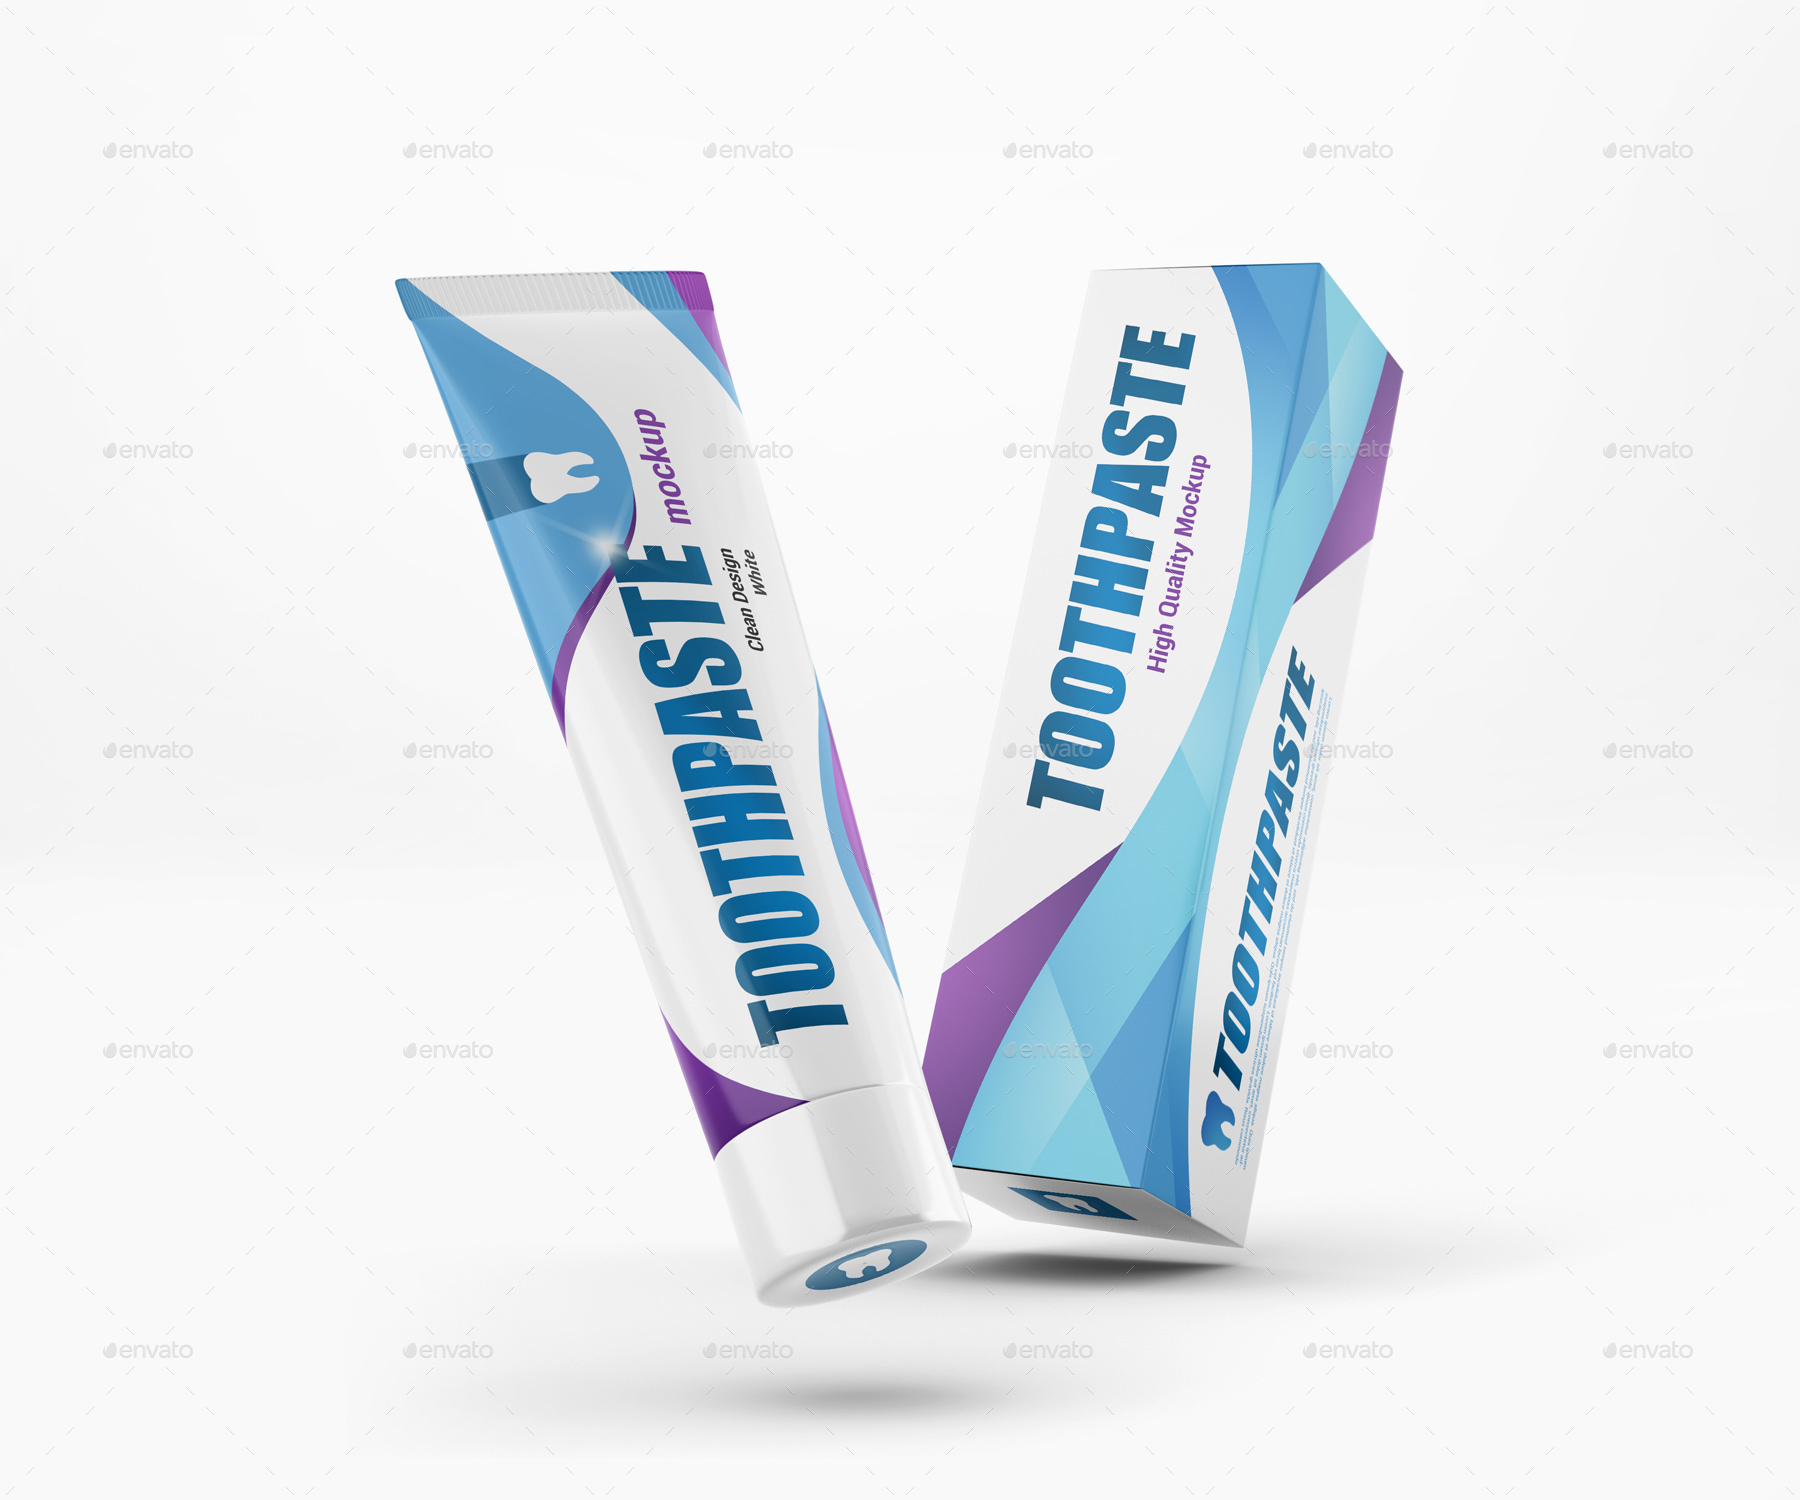 Toothpaste Mockup By Pixelica21 Graphicriver